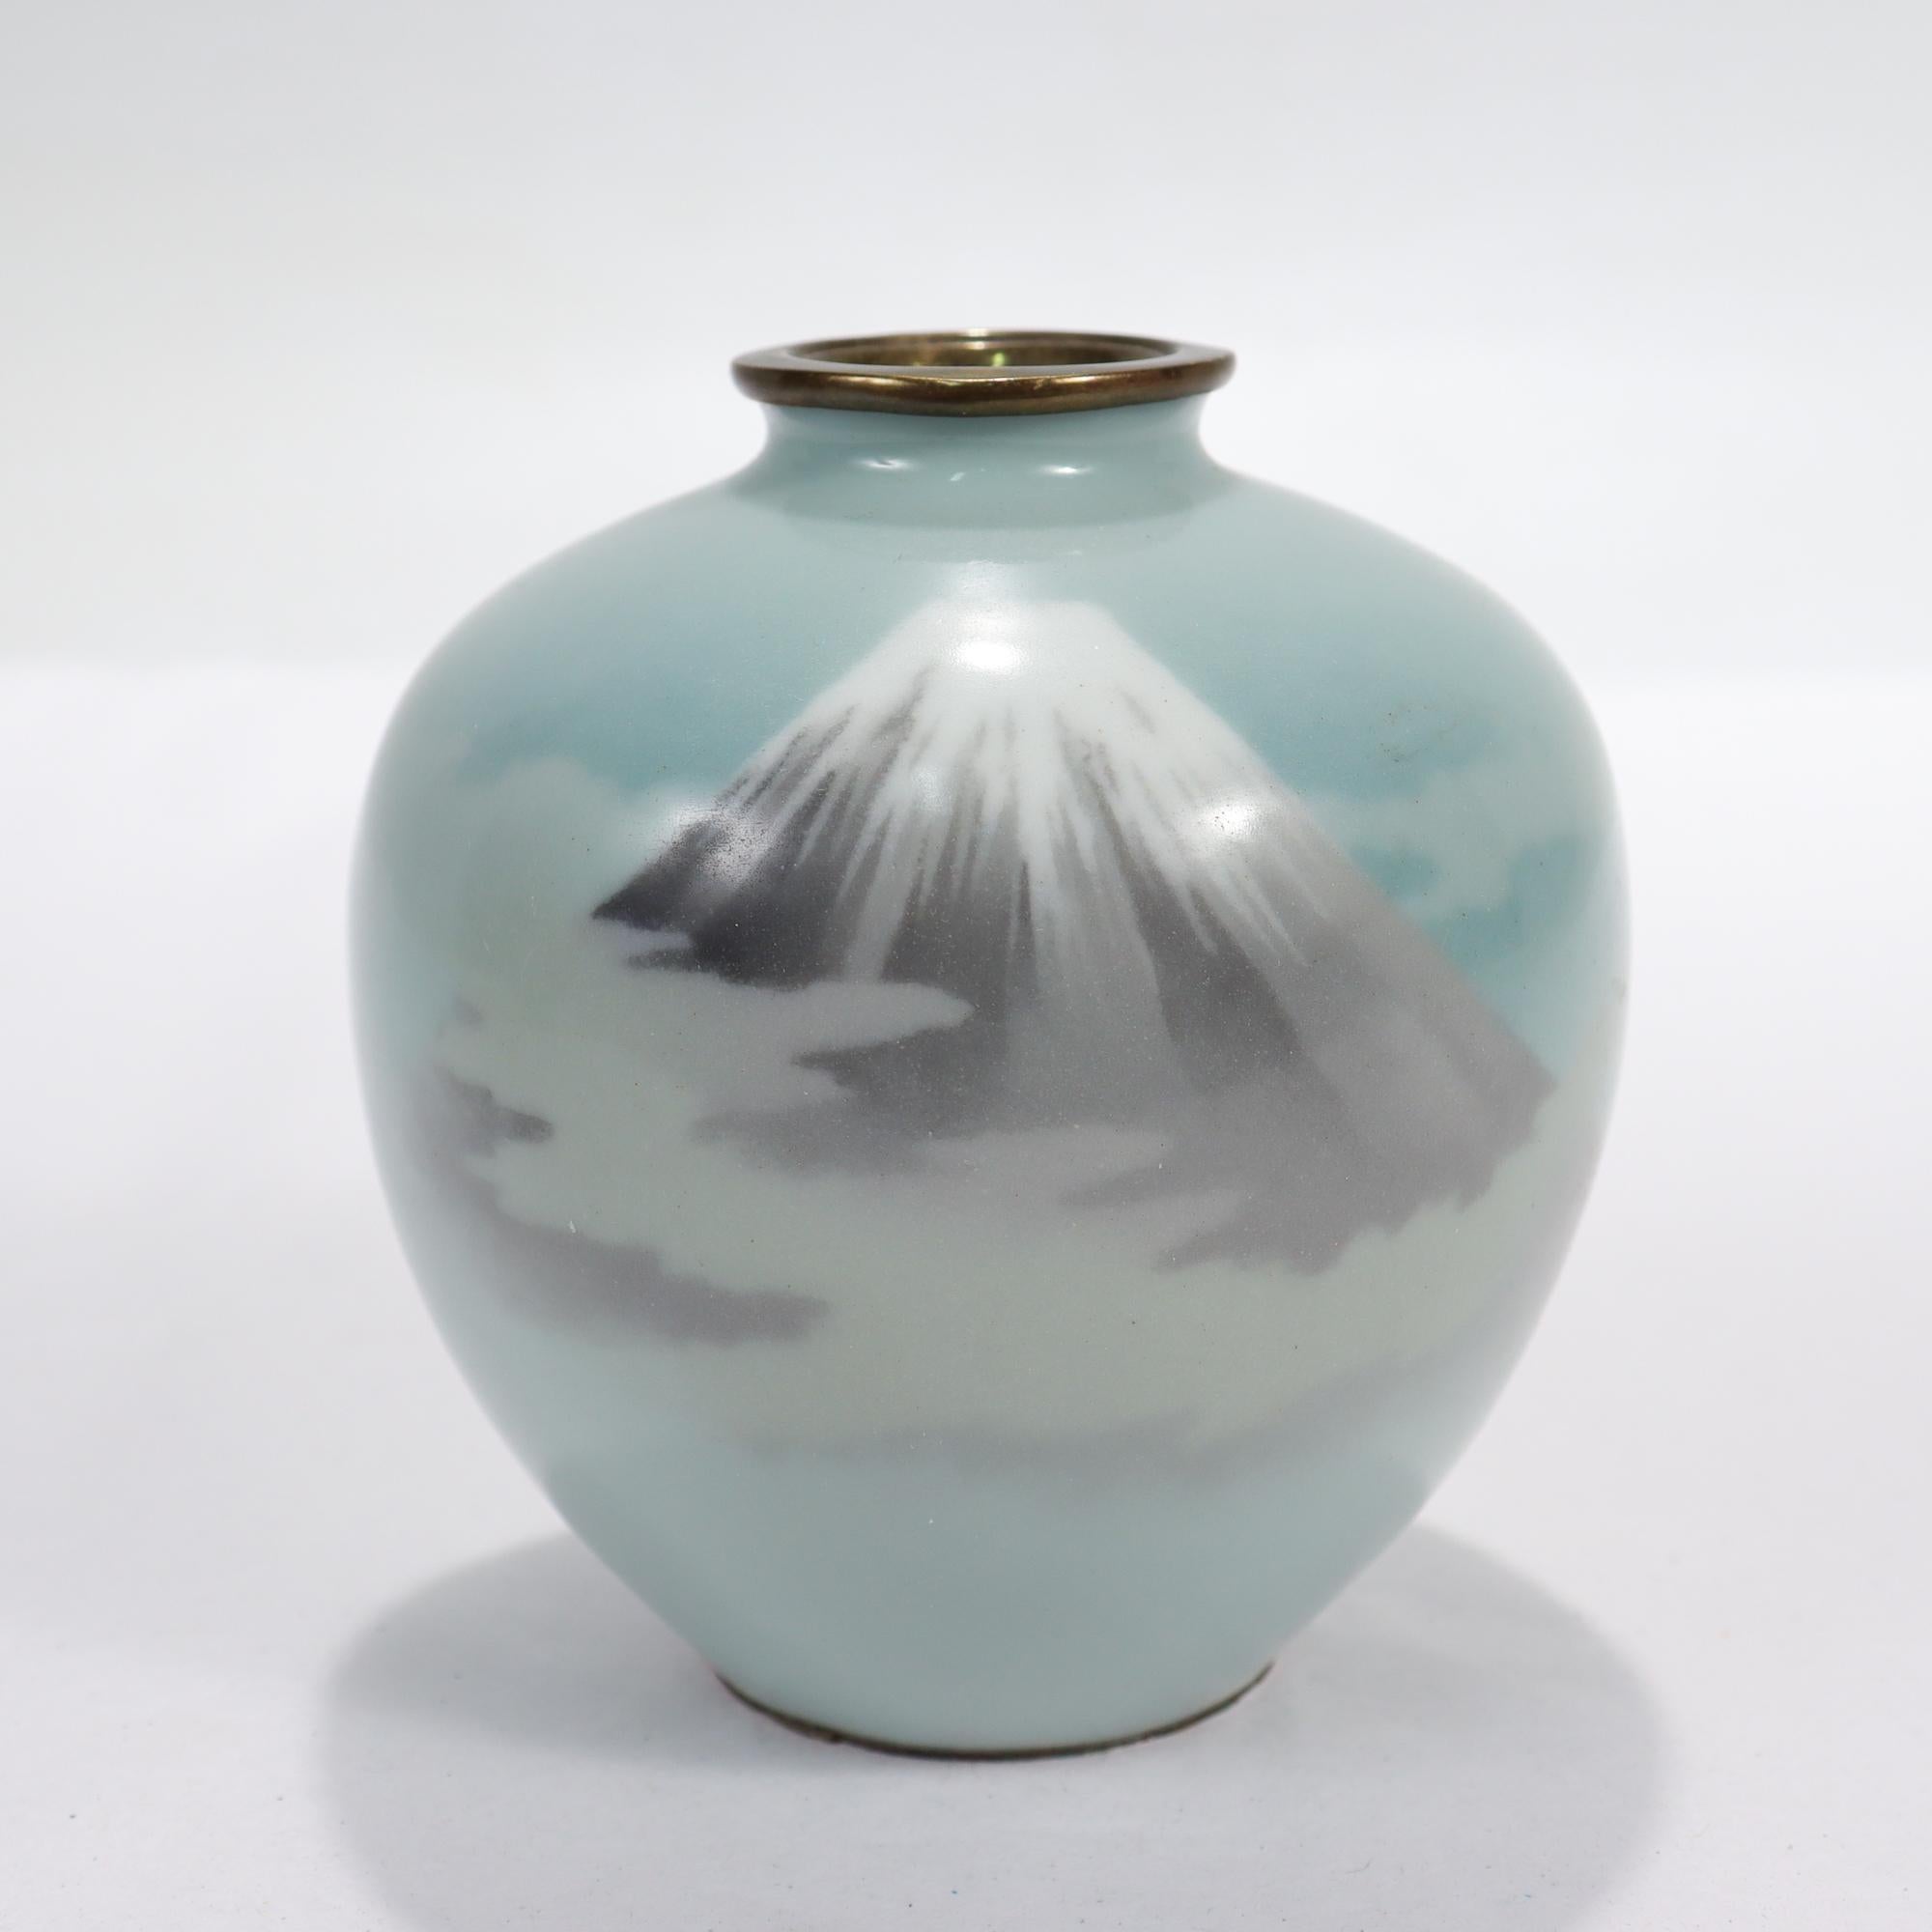 A vey fine, antique cloisonne enamel vase.

With a depiction of Mt. Fuji enshrouded by clouds against a light blue ground.

Simply a lovely little Japanese vase!

Date:
Late 19th or Early 20th Century

Overall Condition:
It is in overall good,